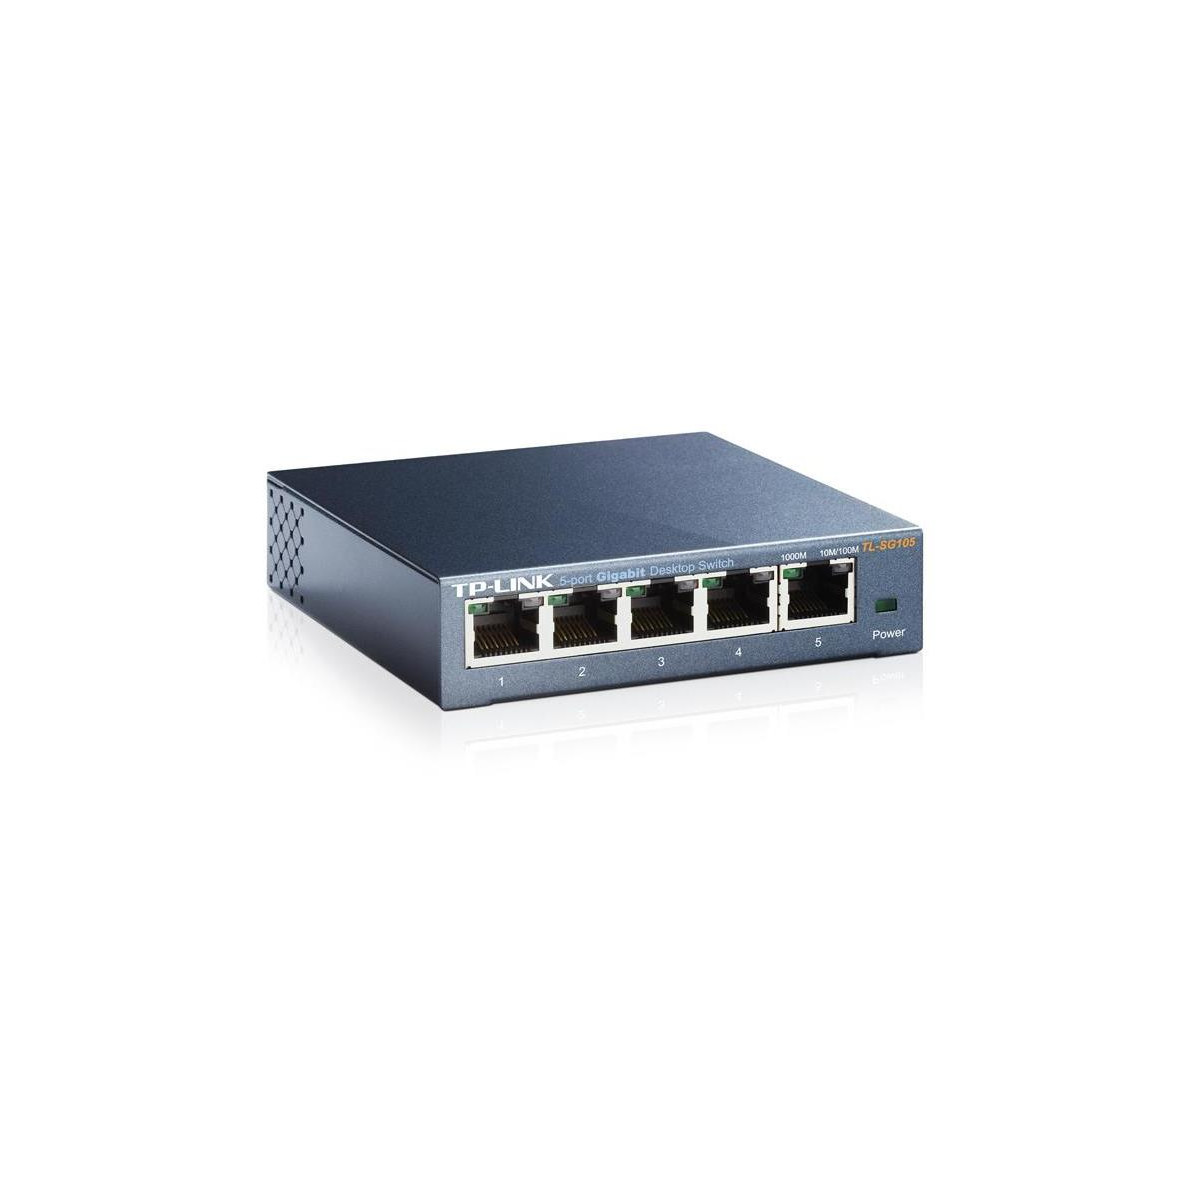 More about Switch TP-LINK TL-SG105